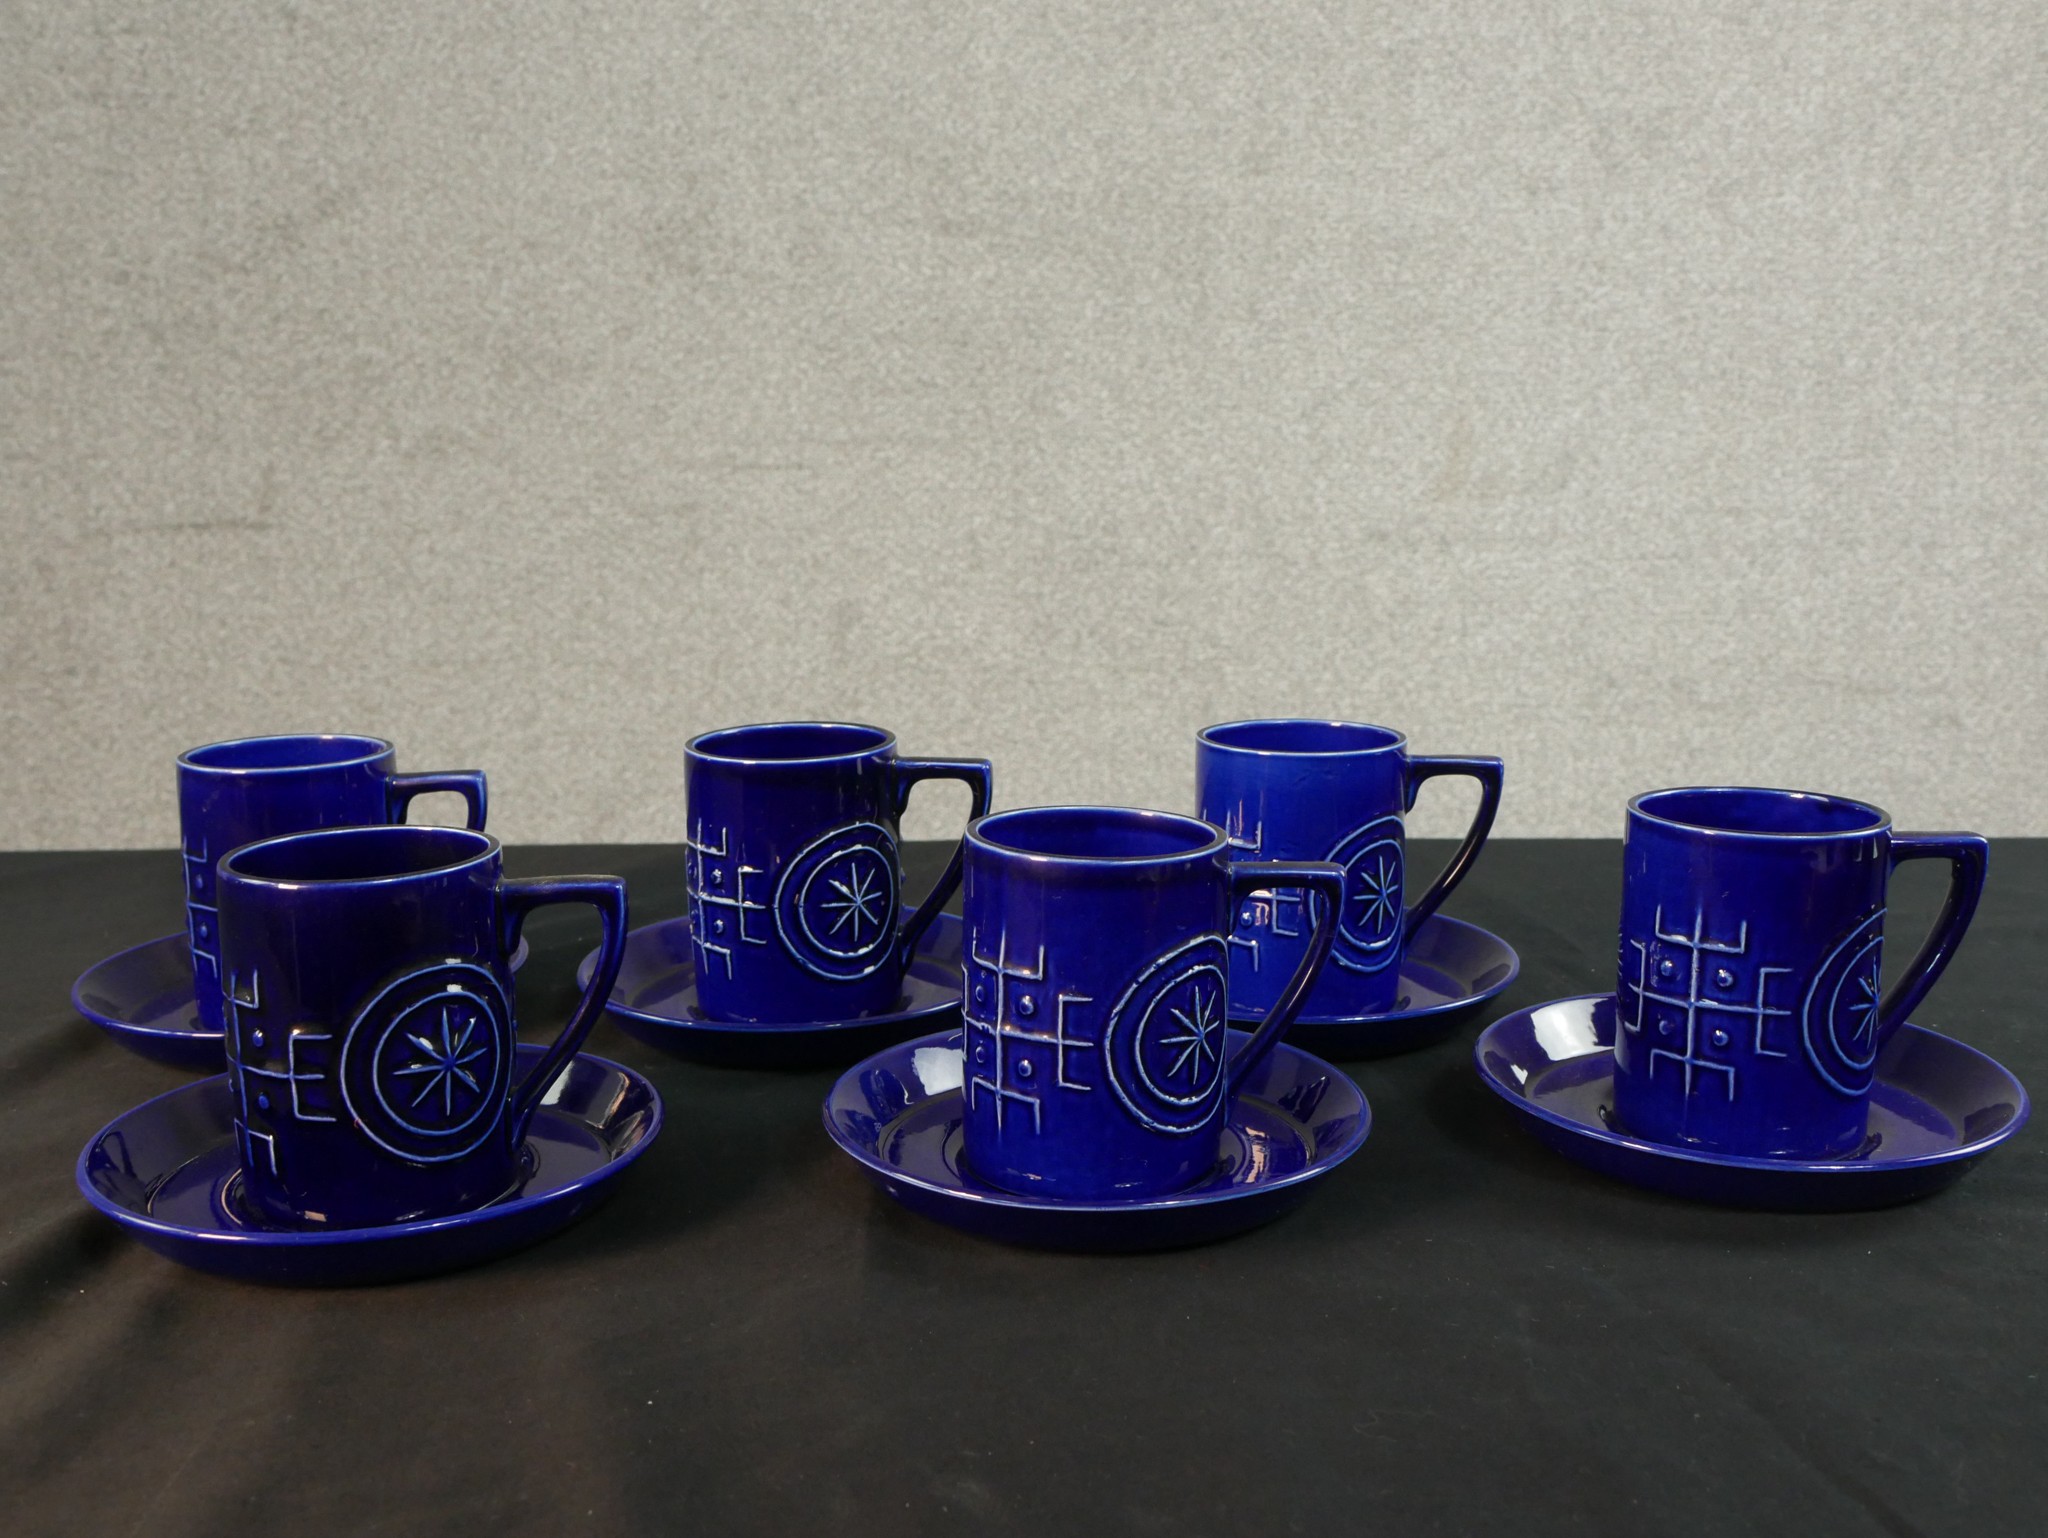 Susan Williams-Ellis for Portmeirion, a Totem pattern coffee set in a cobalt blue glaze, to seat - Image 4 of 6